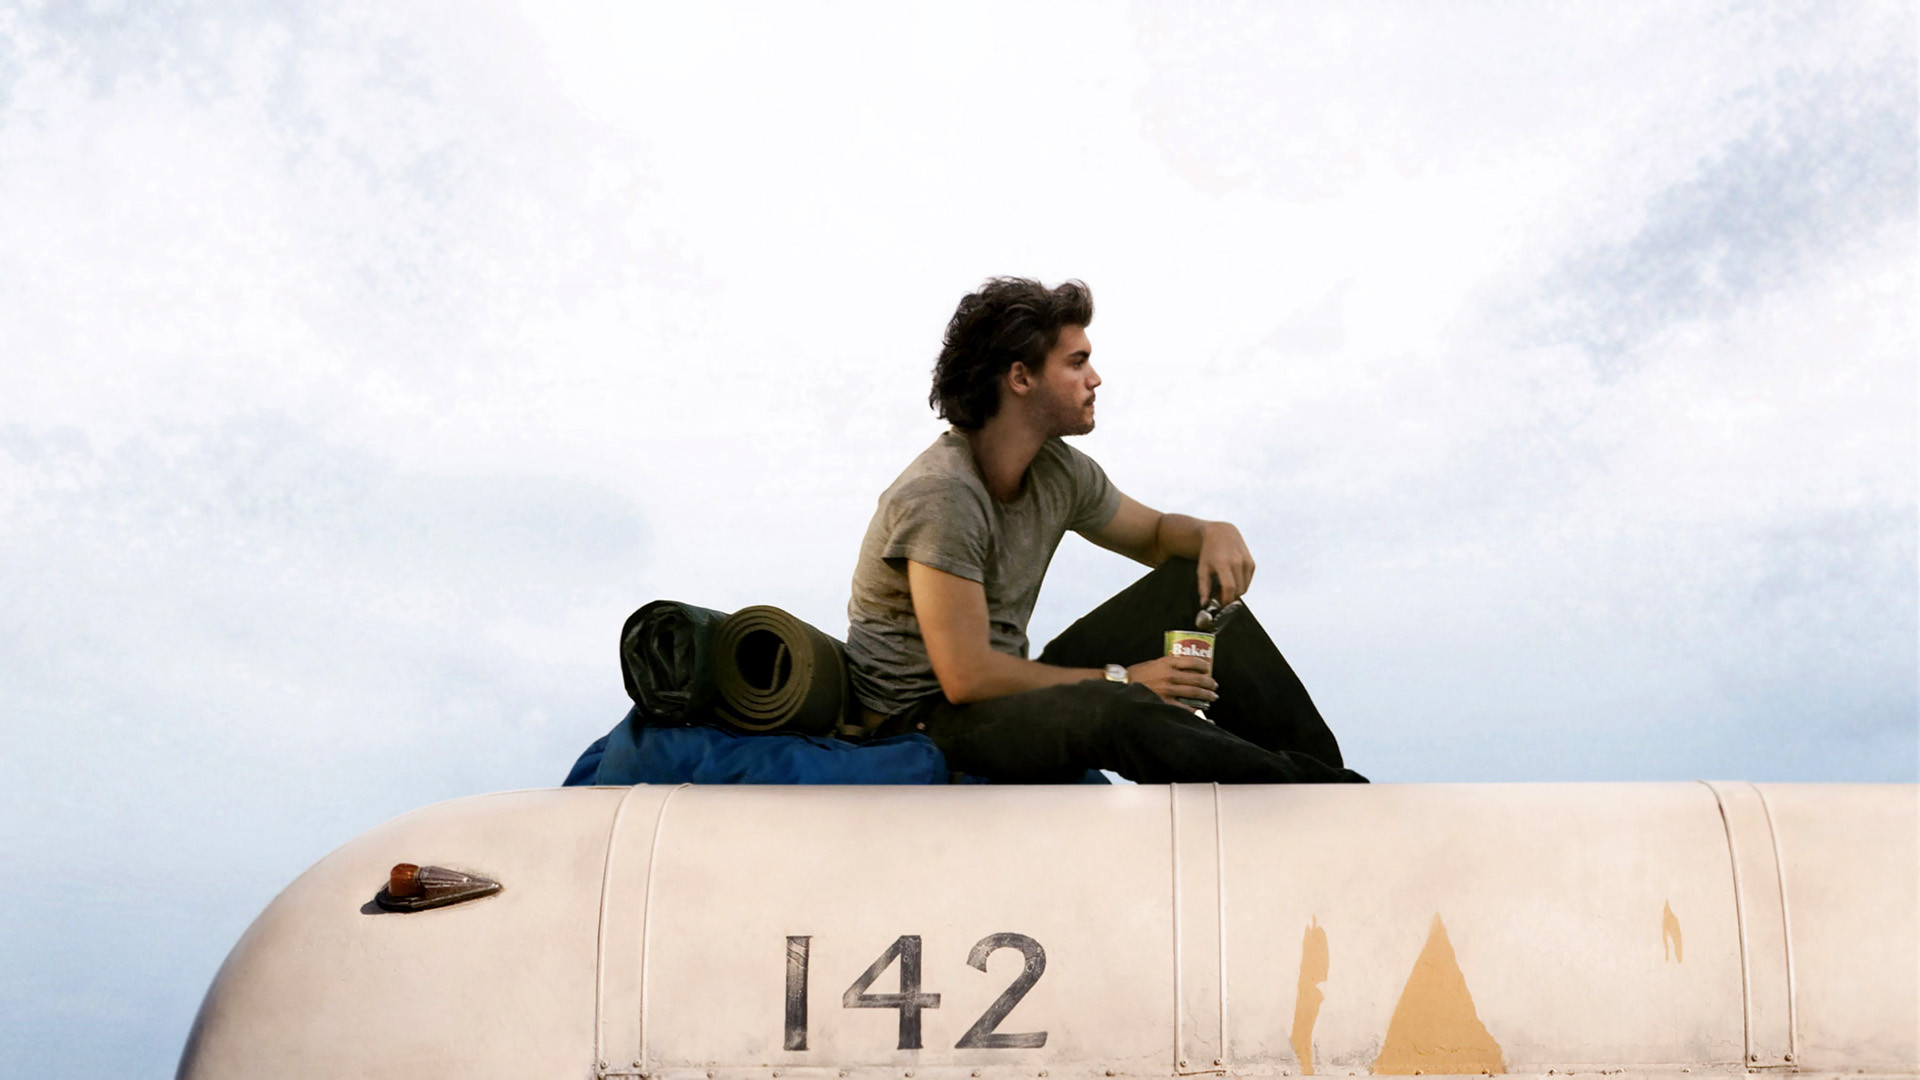 Top HD Into The Wild Wallpaper | Movie HD | 84.46 KB